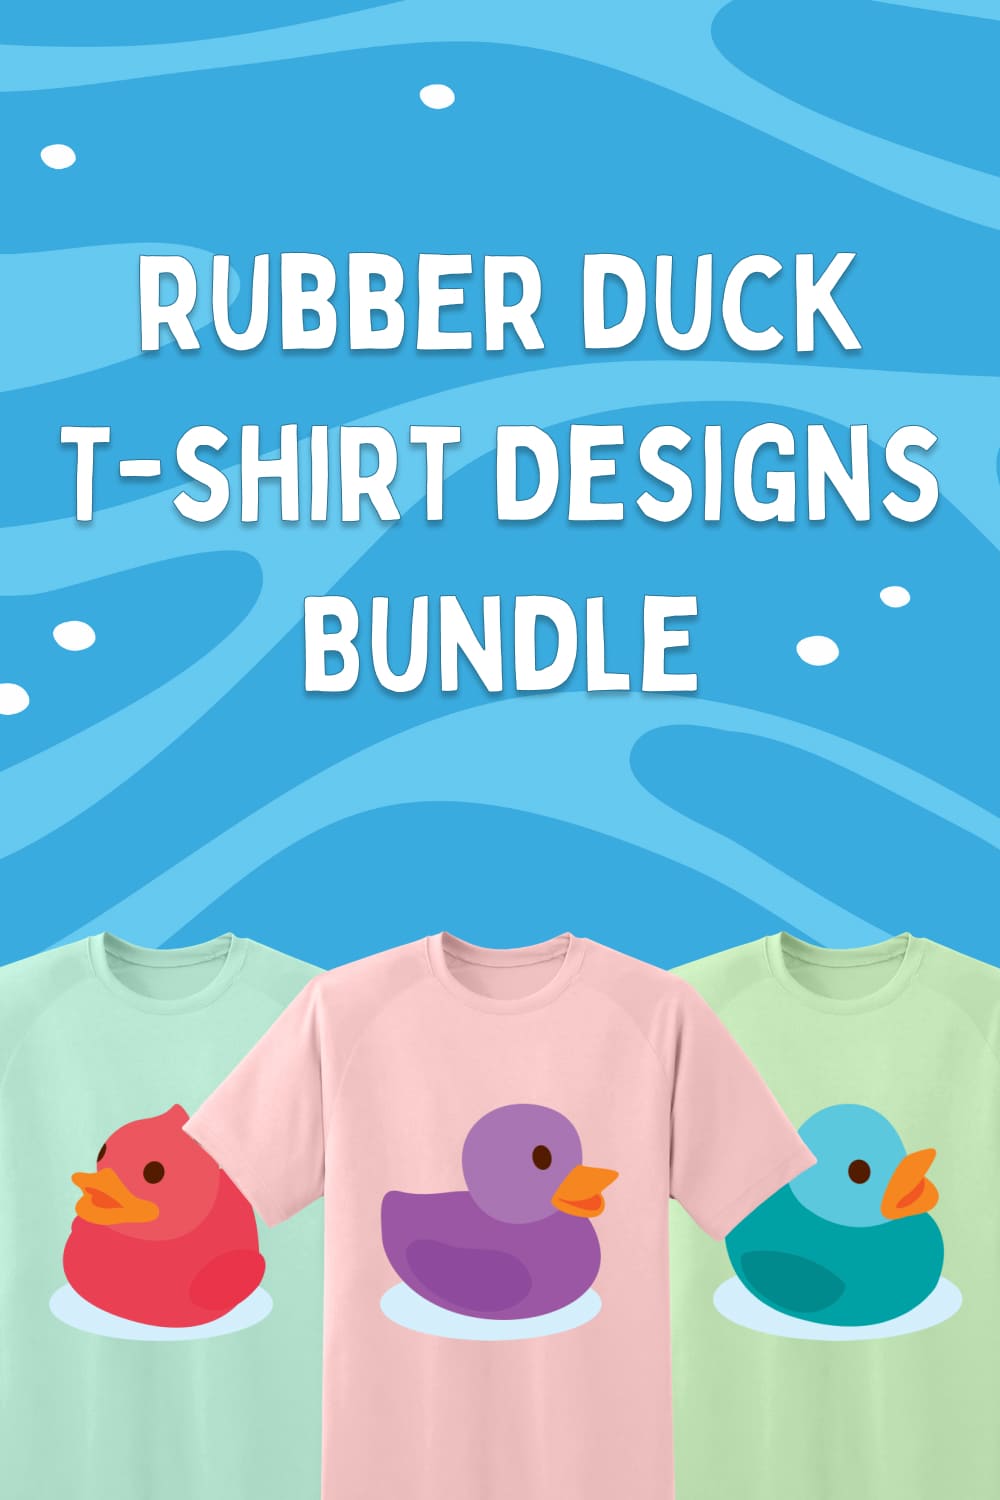 T-shirt images collection with cute rubber duck prints.